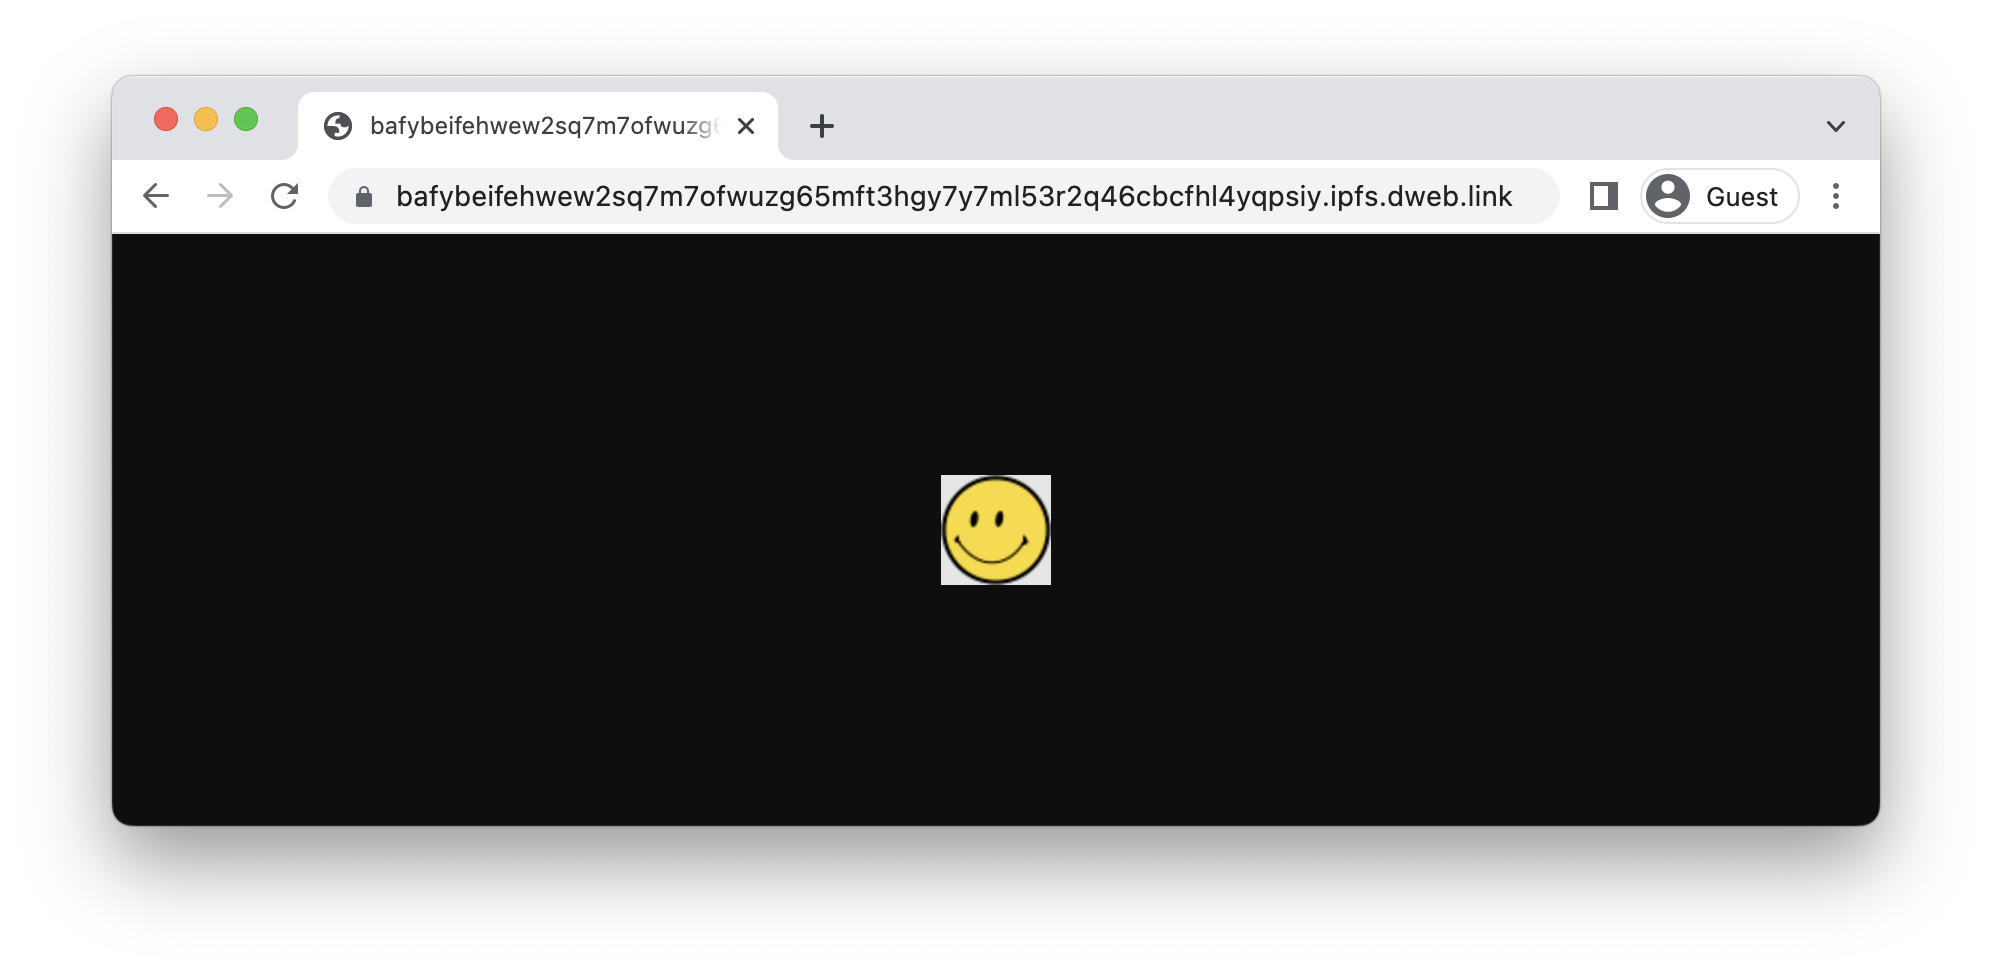 Our simple smiley face NFT as seen on IPFS